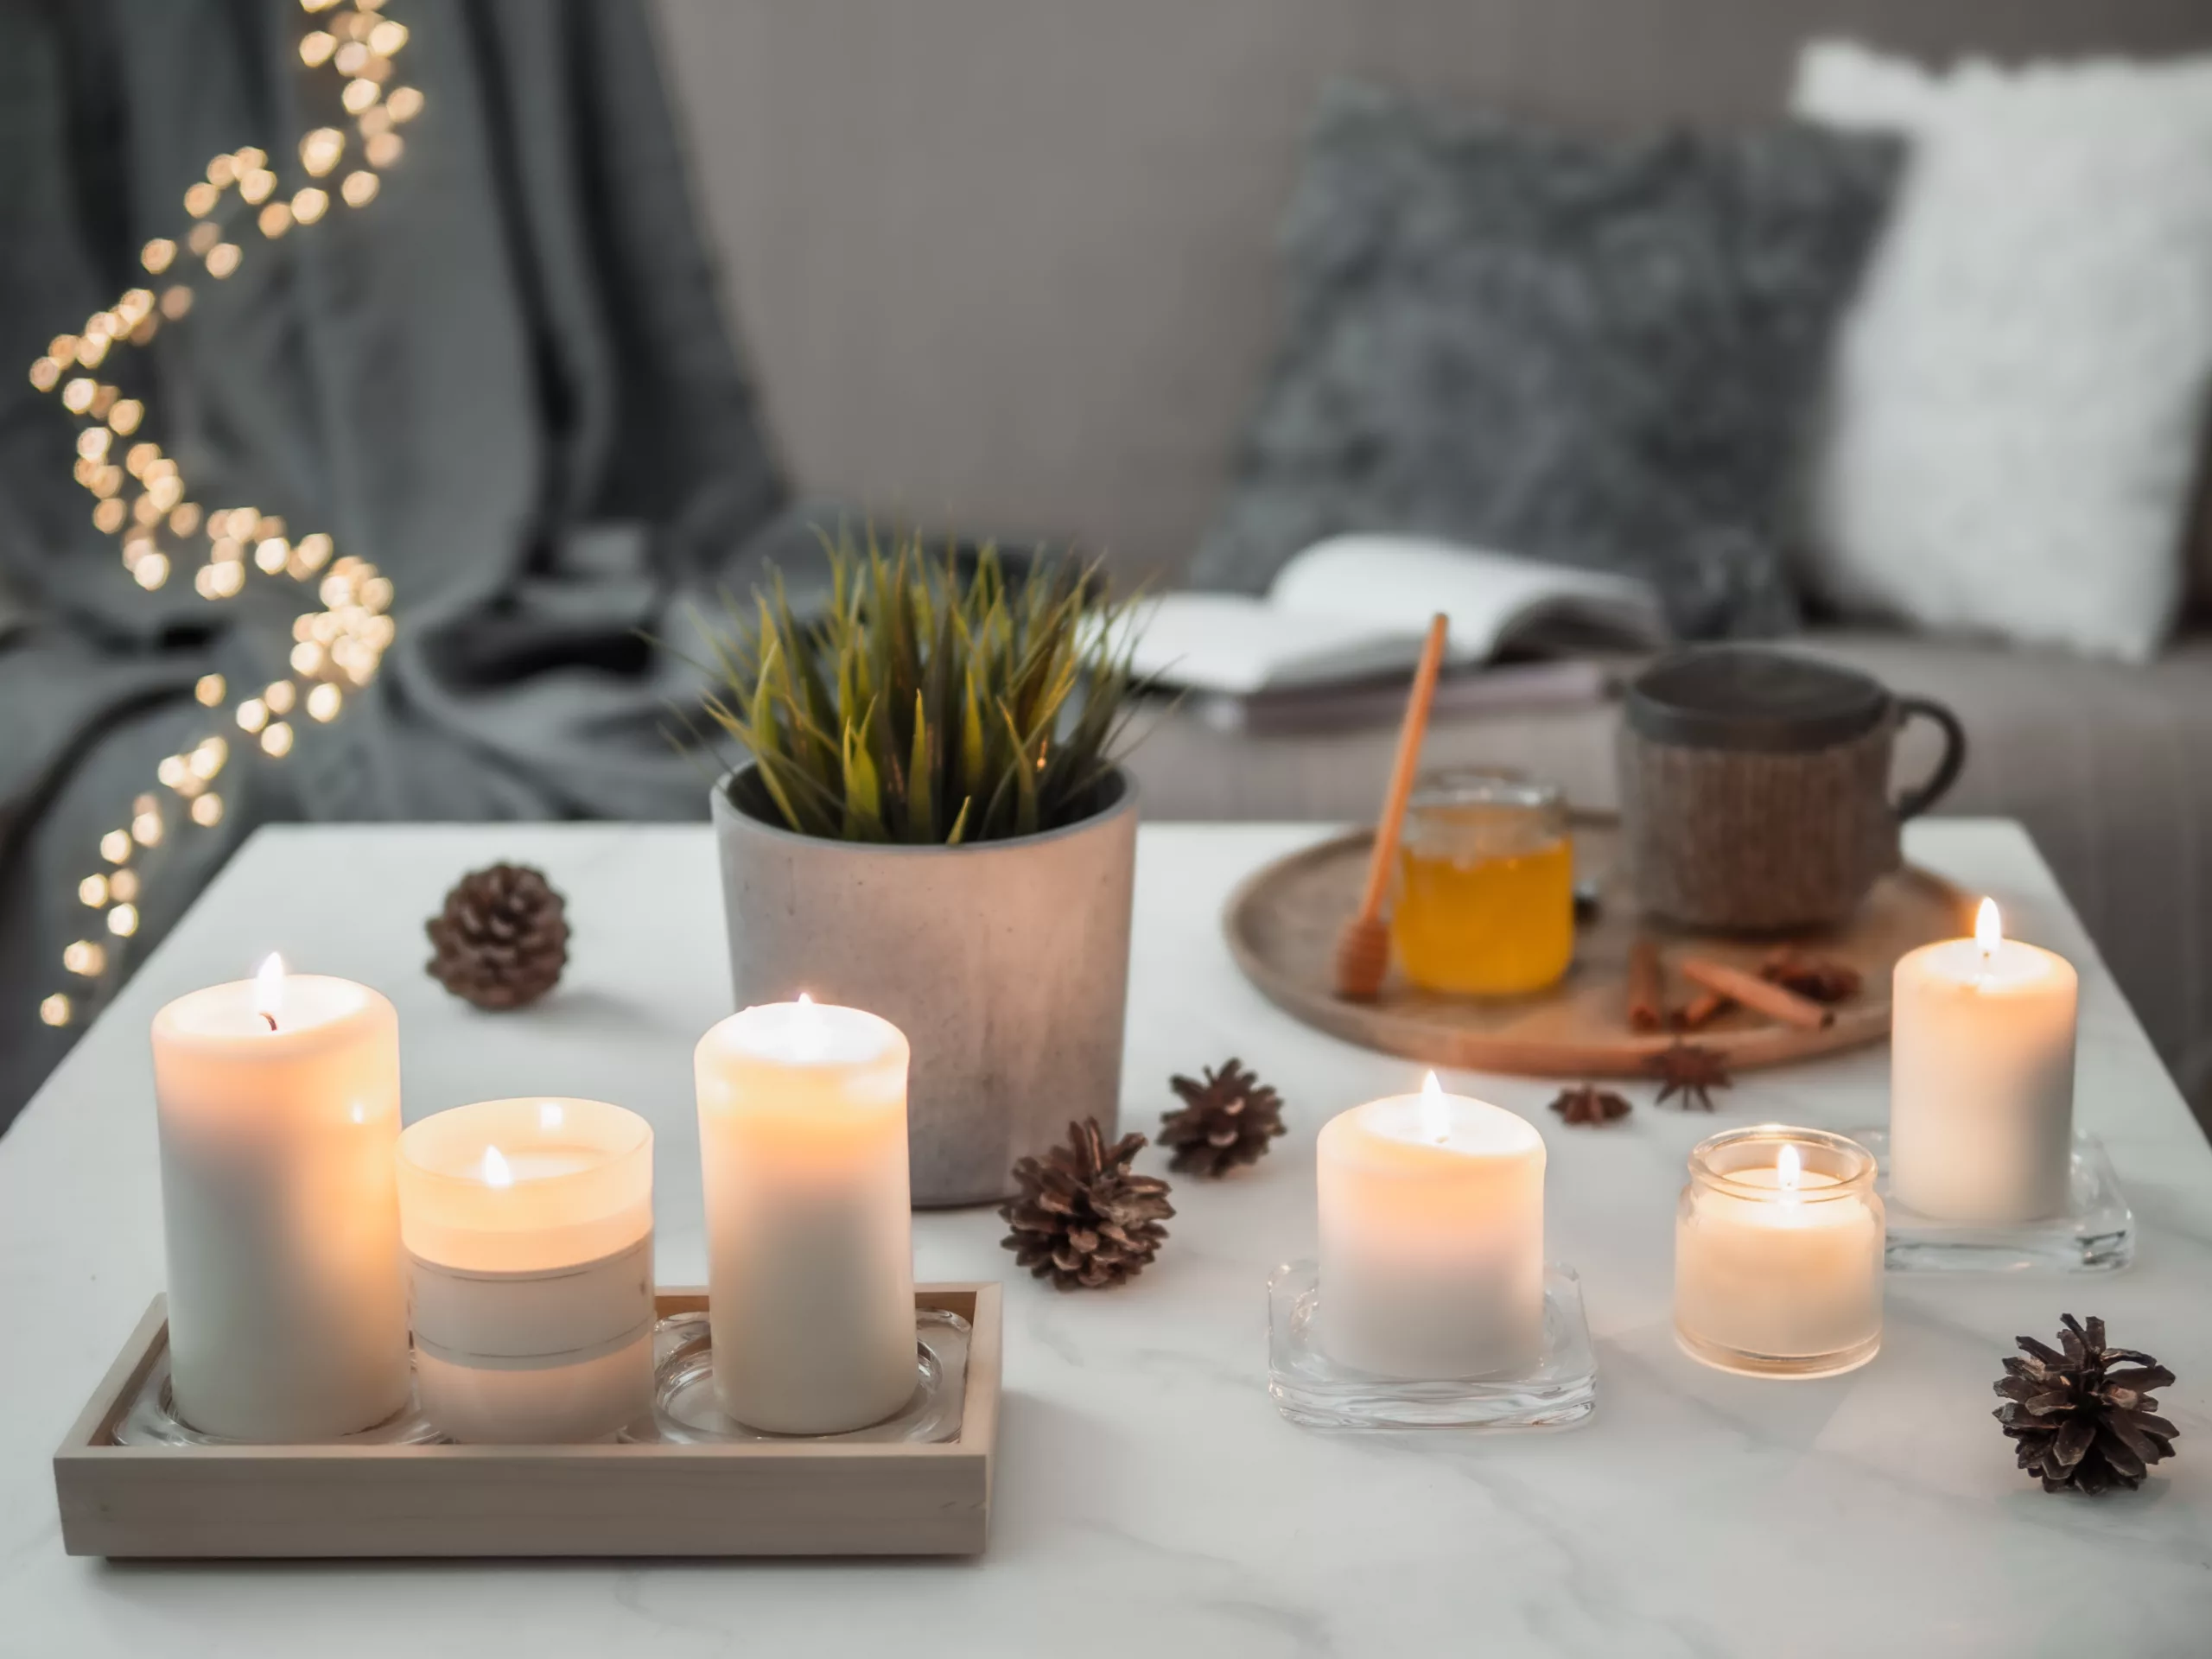 How I practice Hygge to help me enjoy German winters - I love to light candles and use soft lighting.